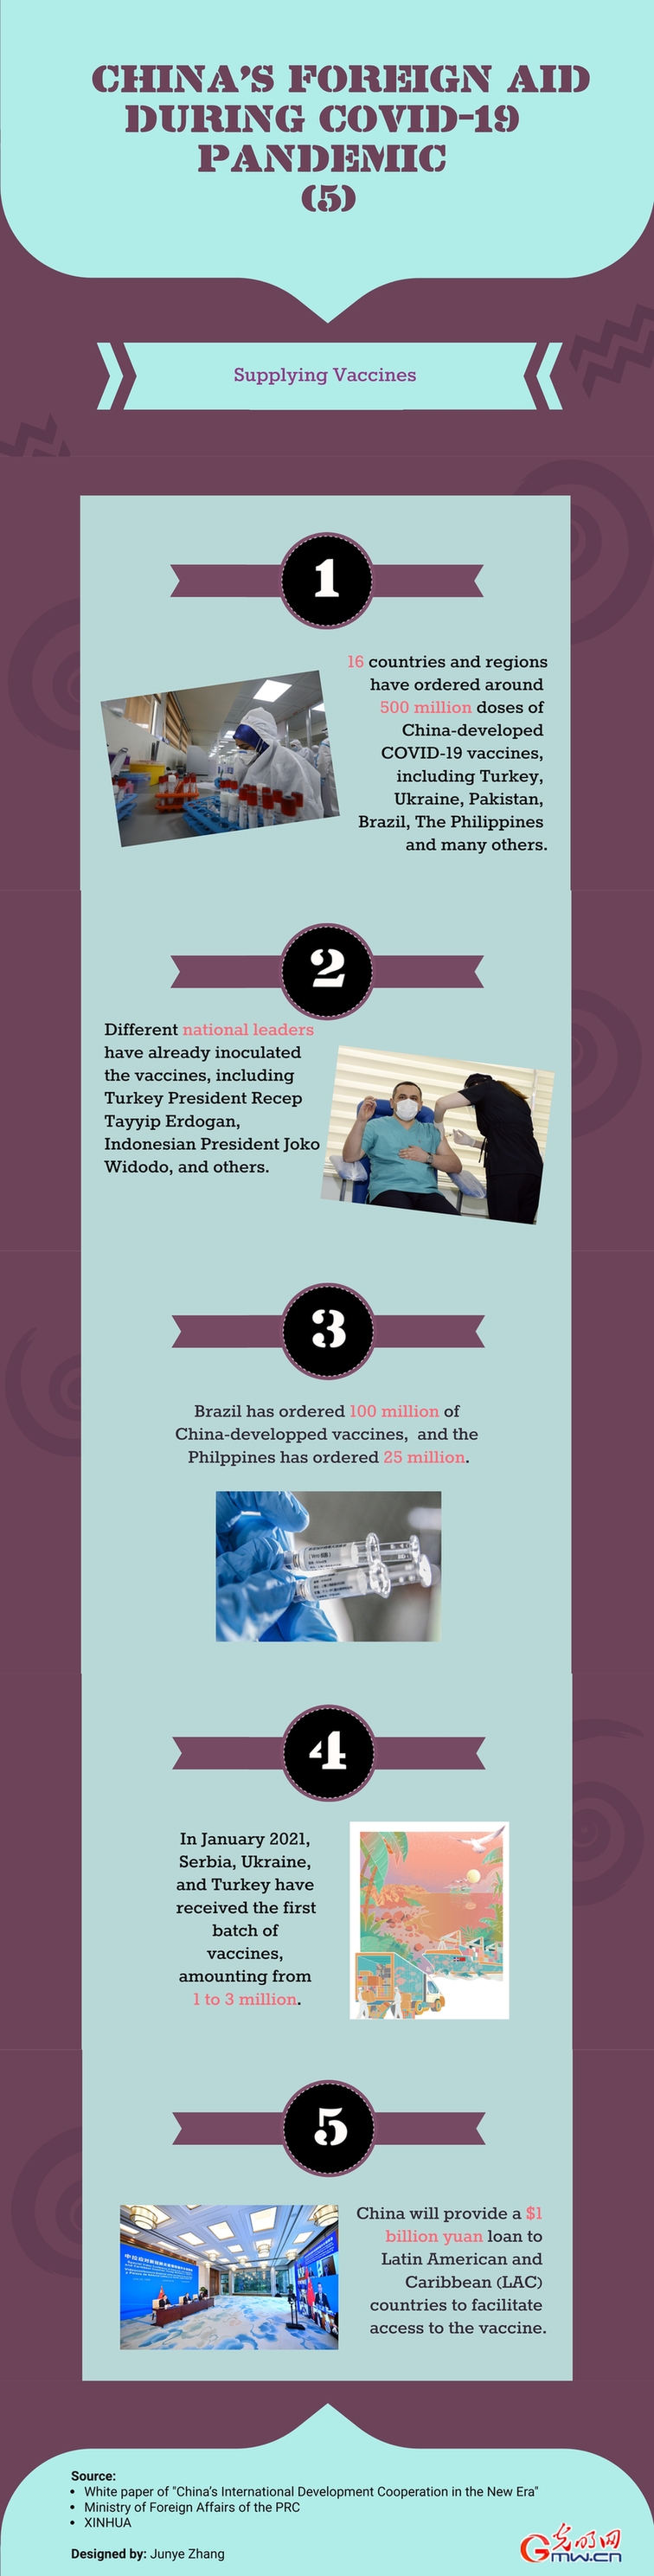 Infographic: China’s Foreign Aid during COVID-19 Pandemic (5)——Supplying Vaccines